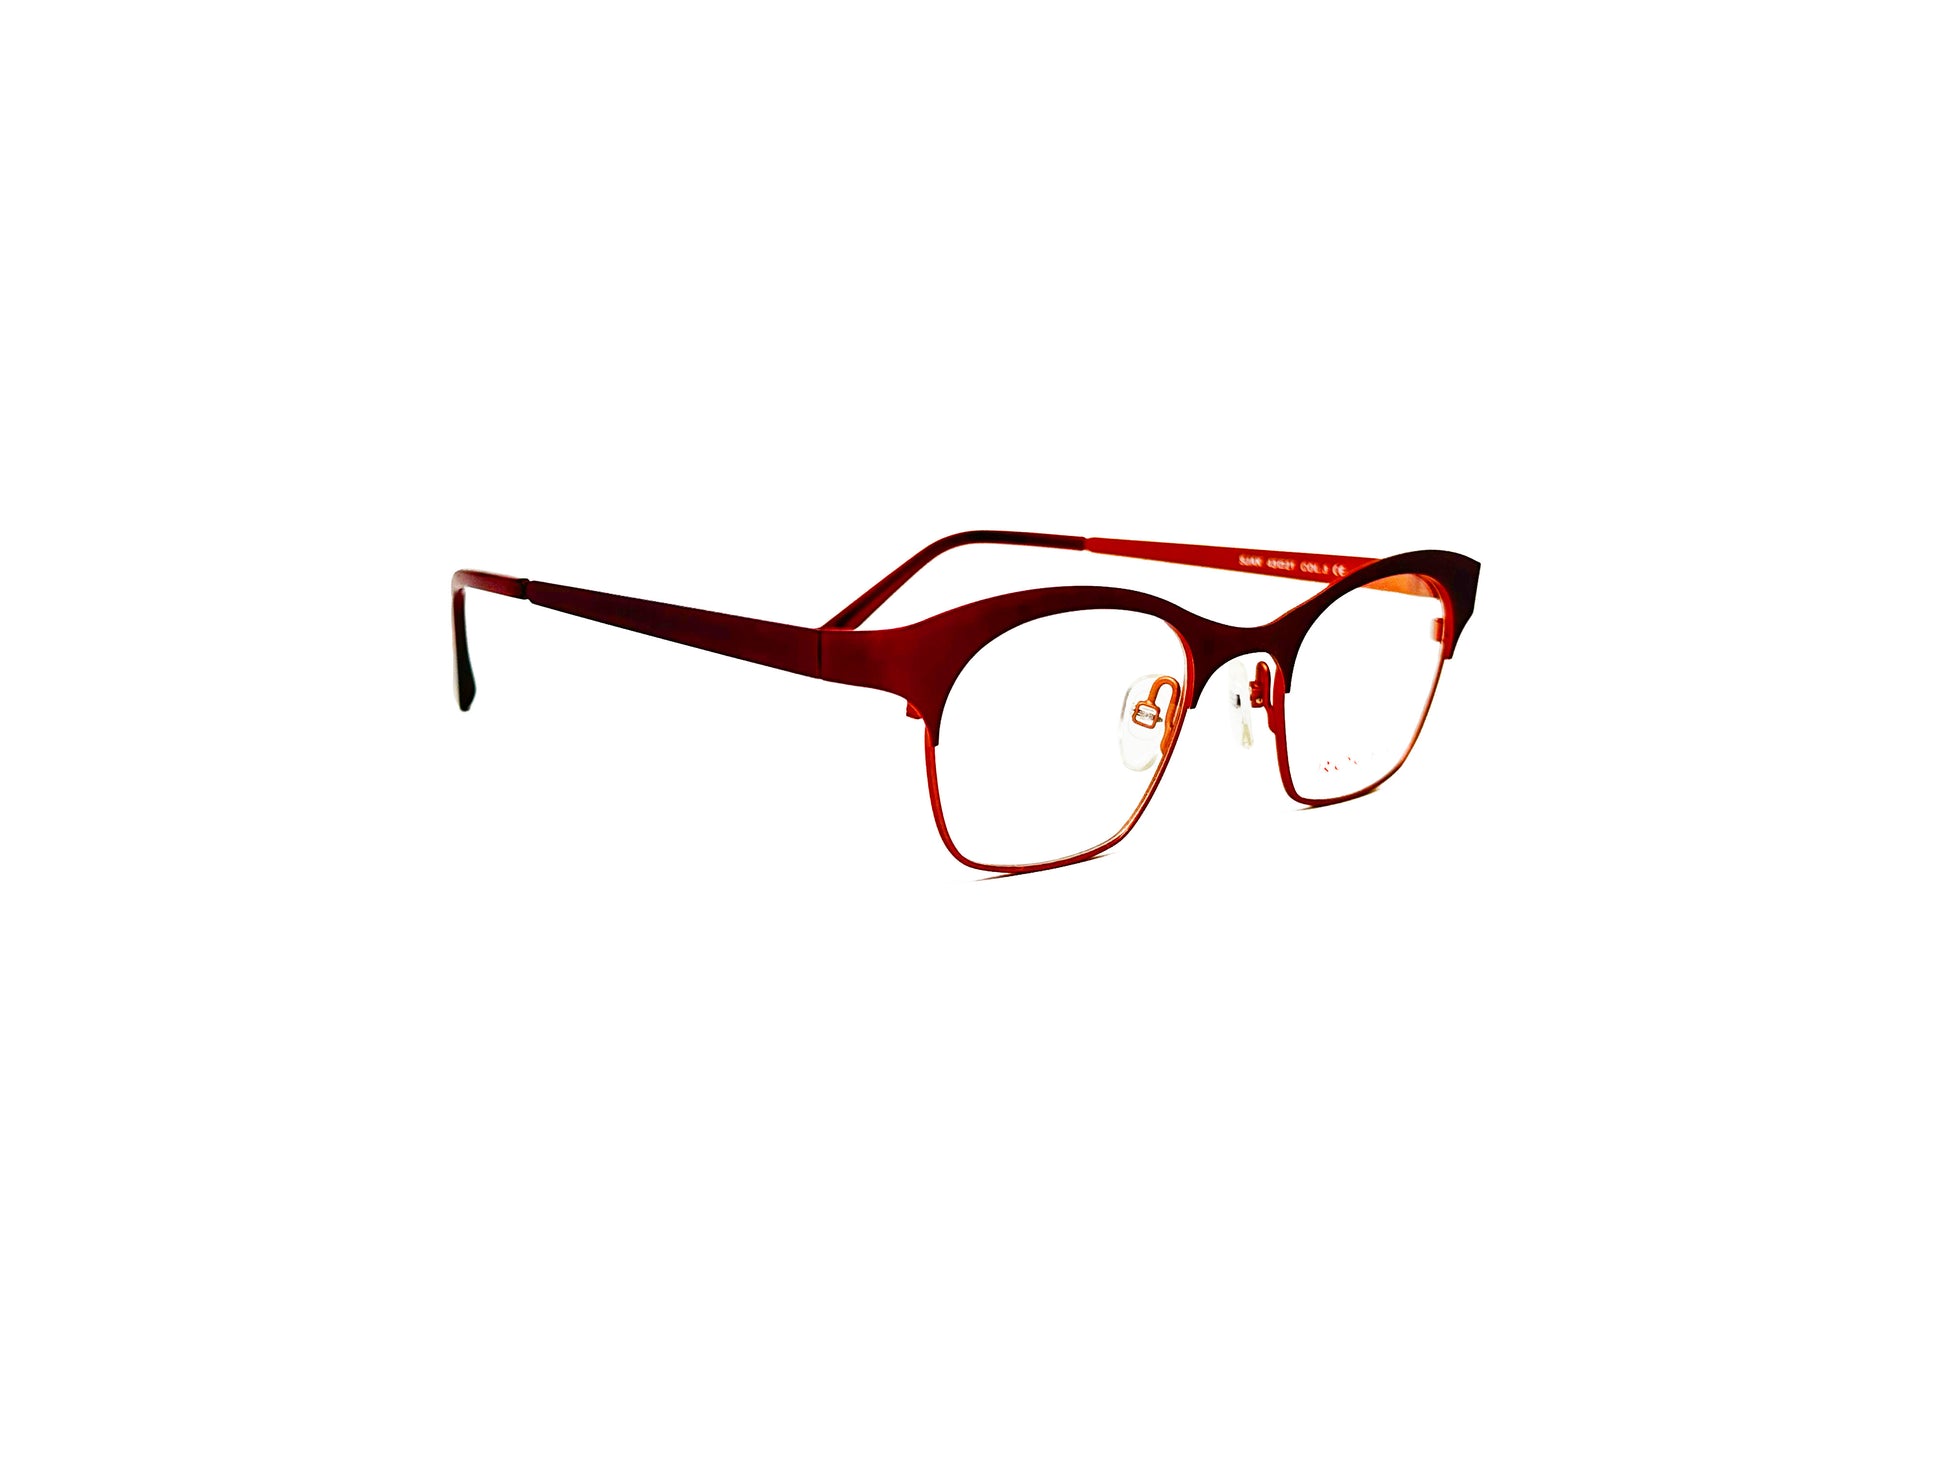 Roger metal, two-toned, rounded square optical frame. Model: Sjak. Color:3 - Red on top and orange on lower half. Side view.